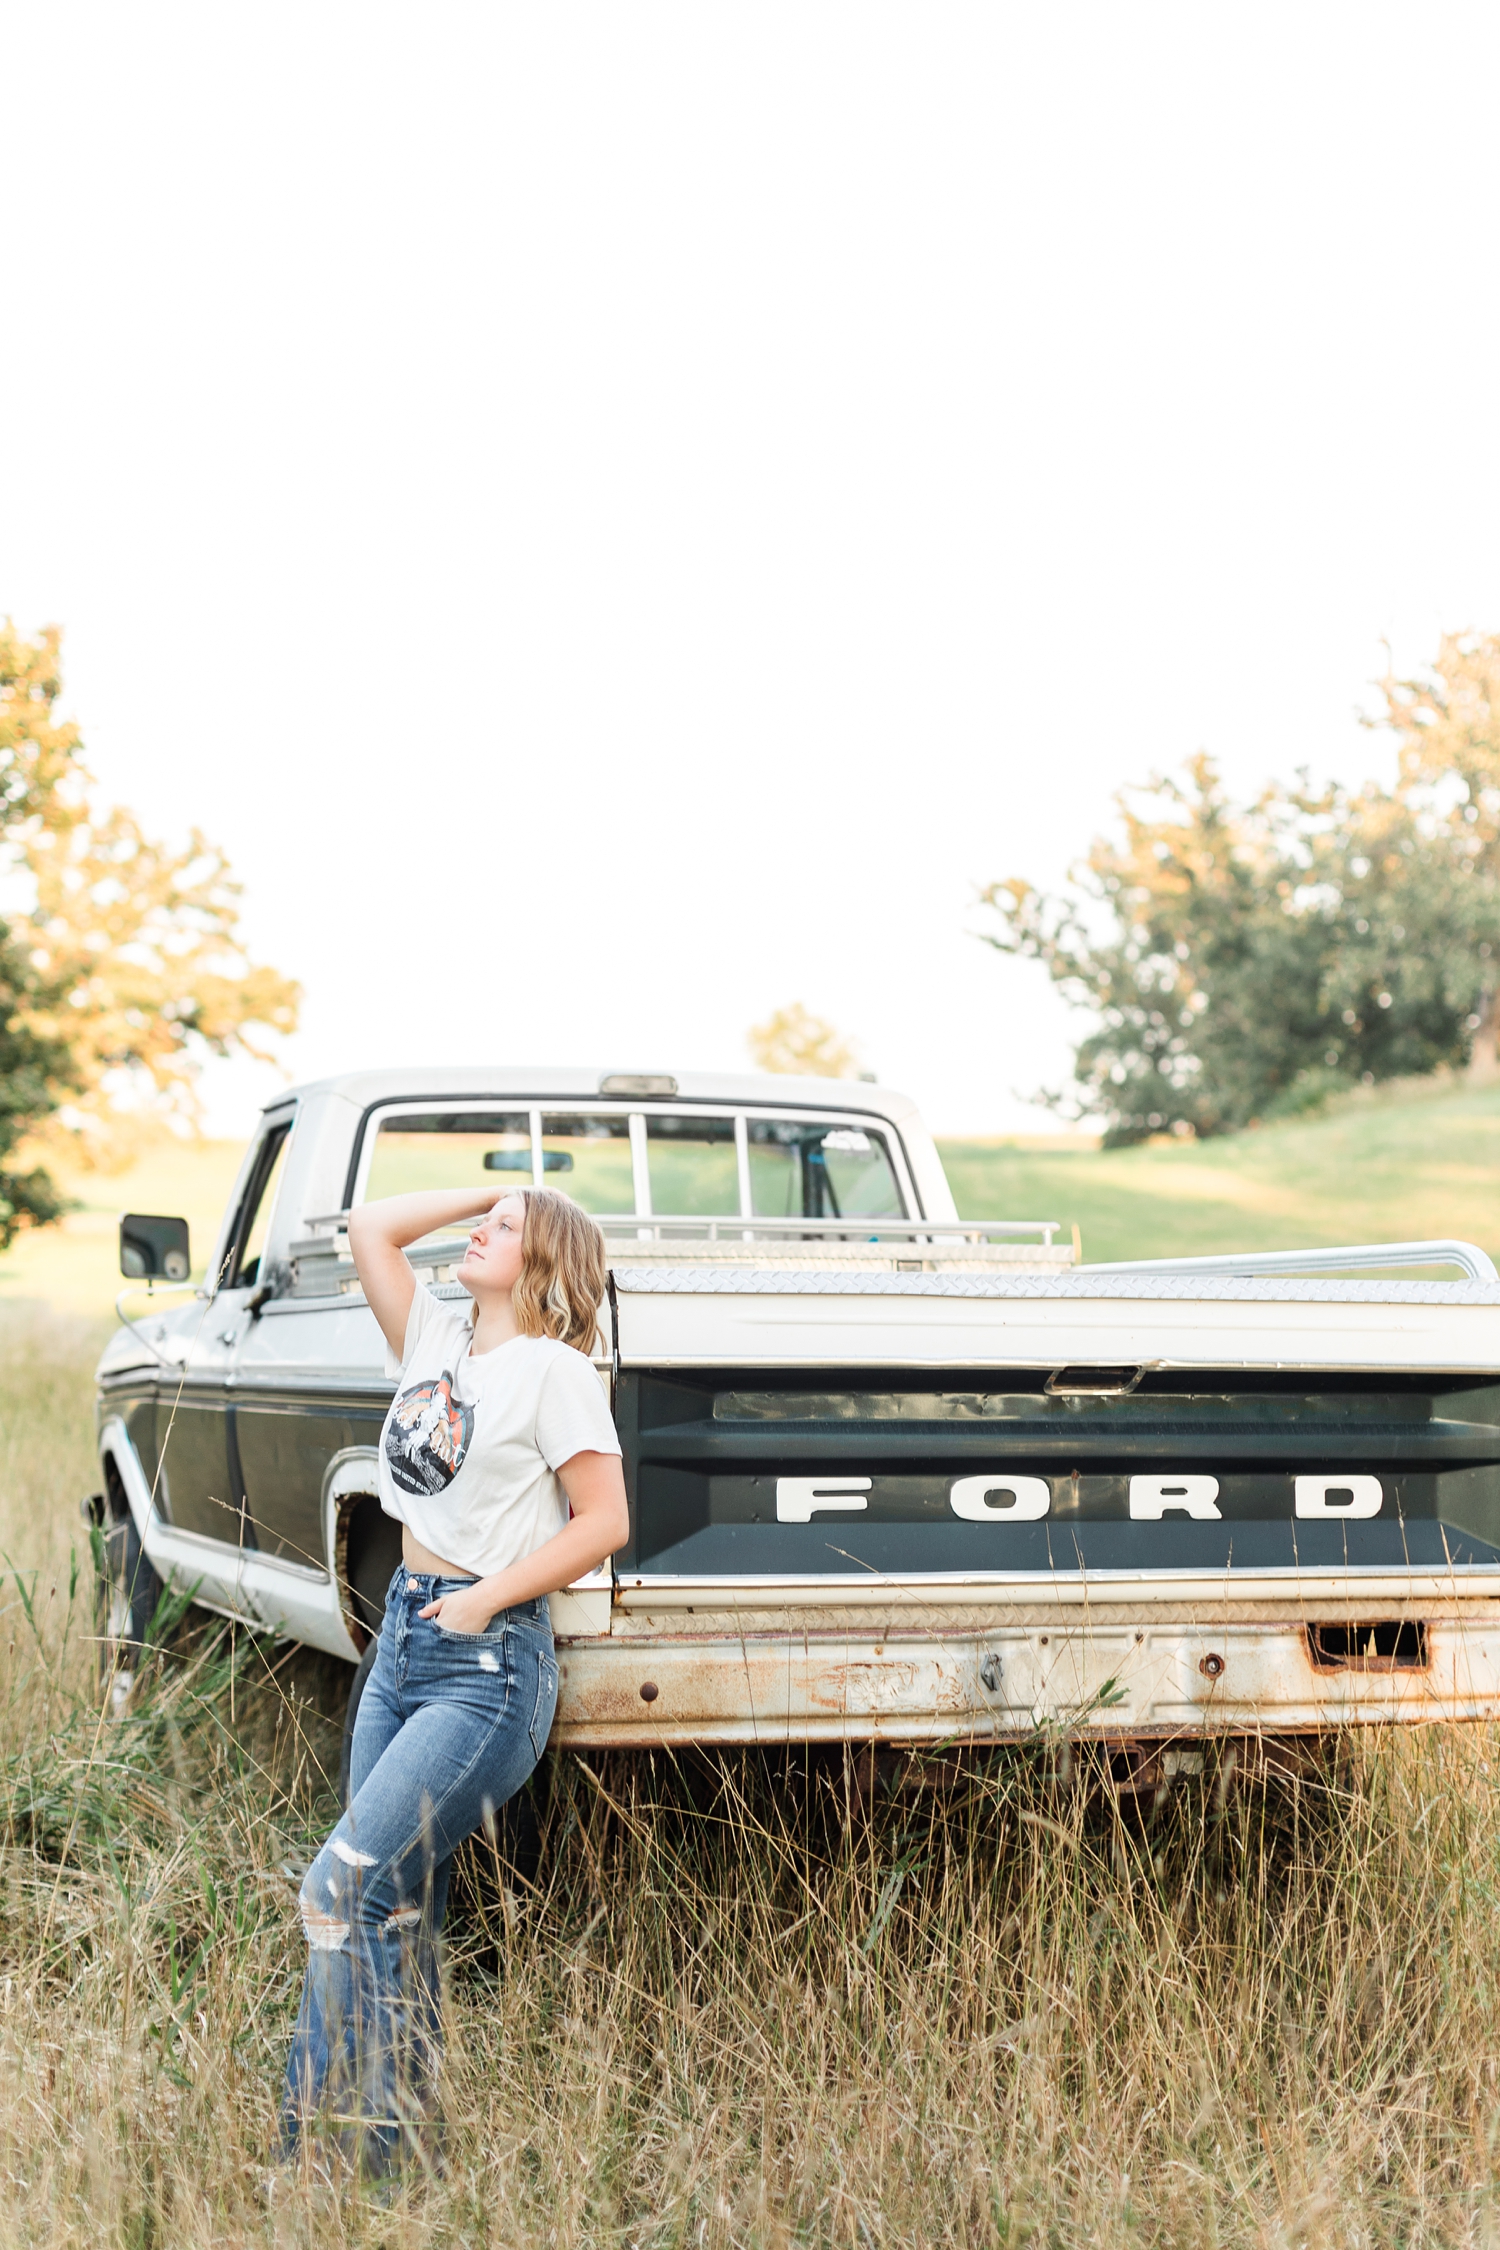 Kenzie leans on the back of a 70's Ford Highboy truck in the middle of a grassy field and looks up to the sky | CB Studio